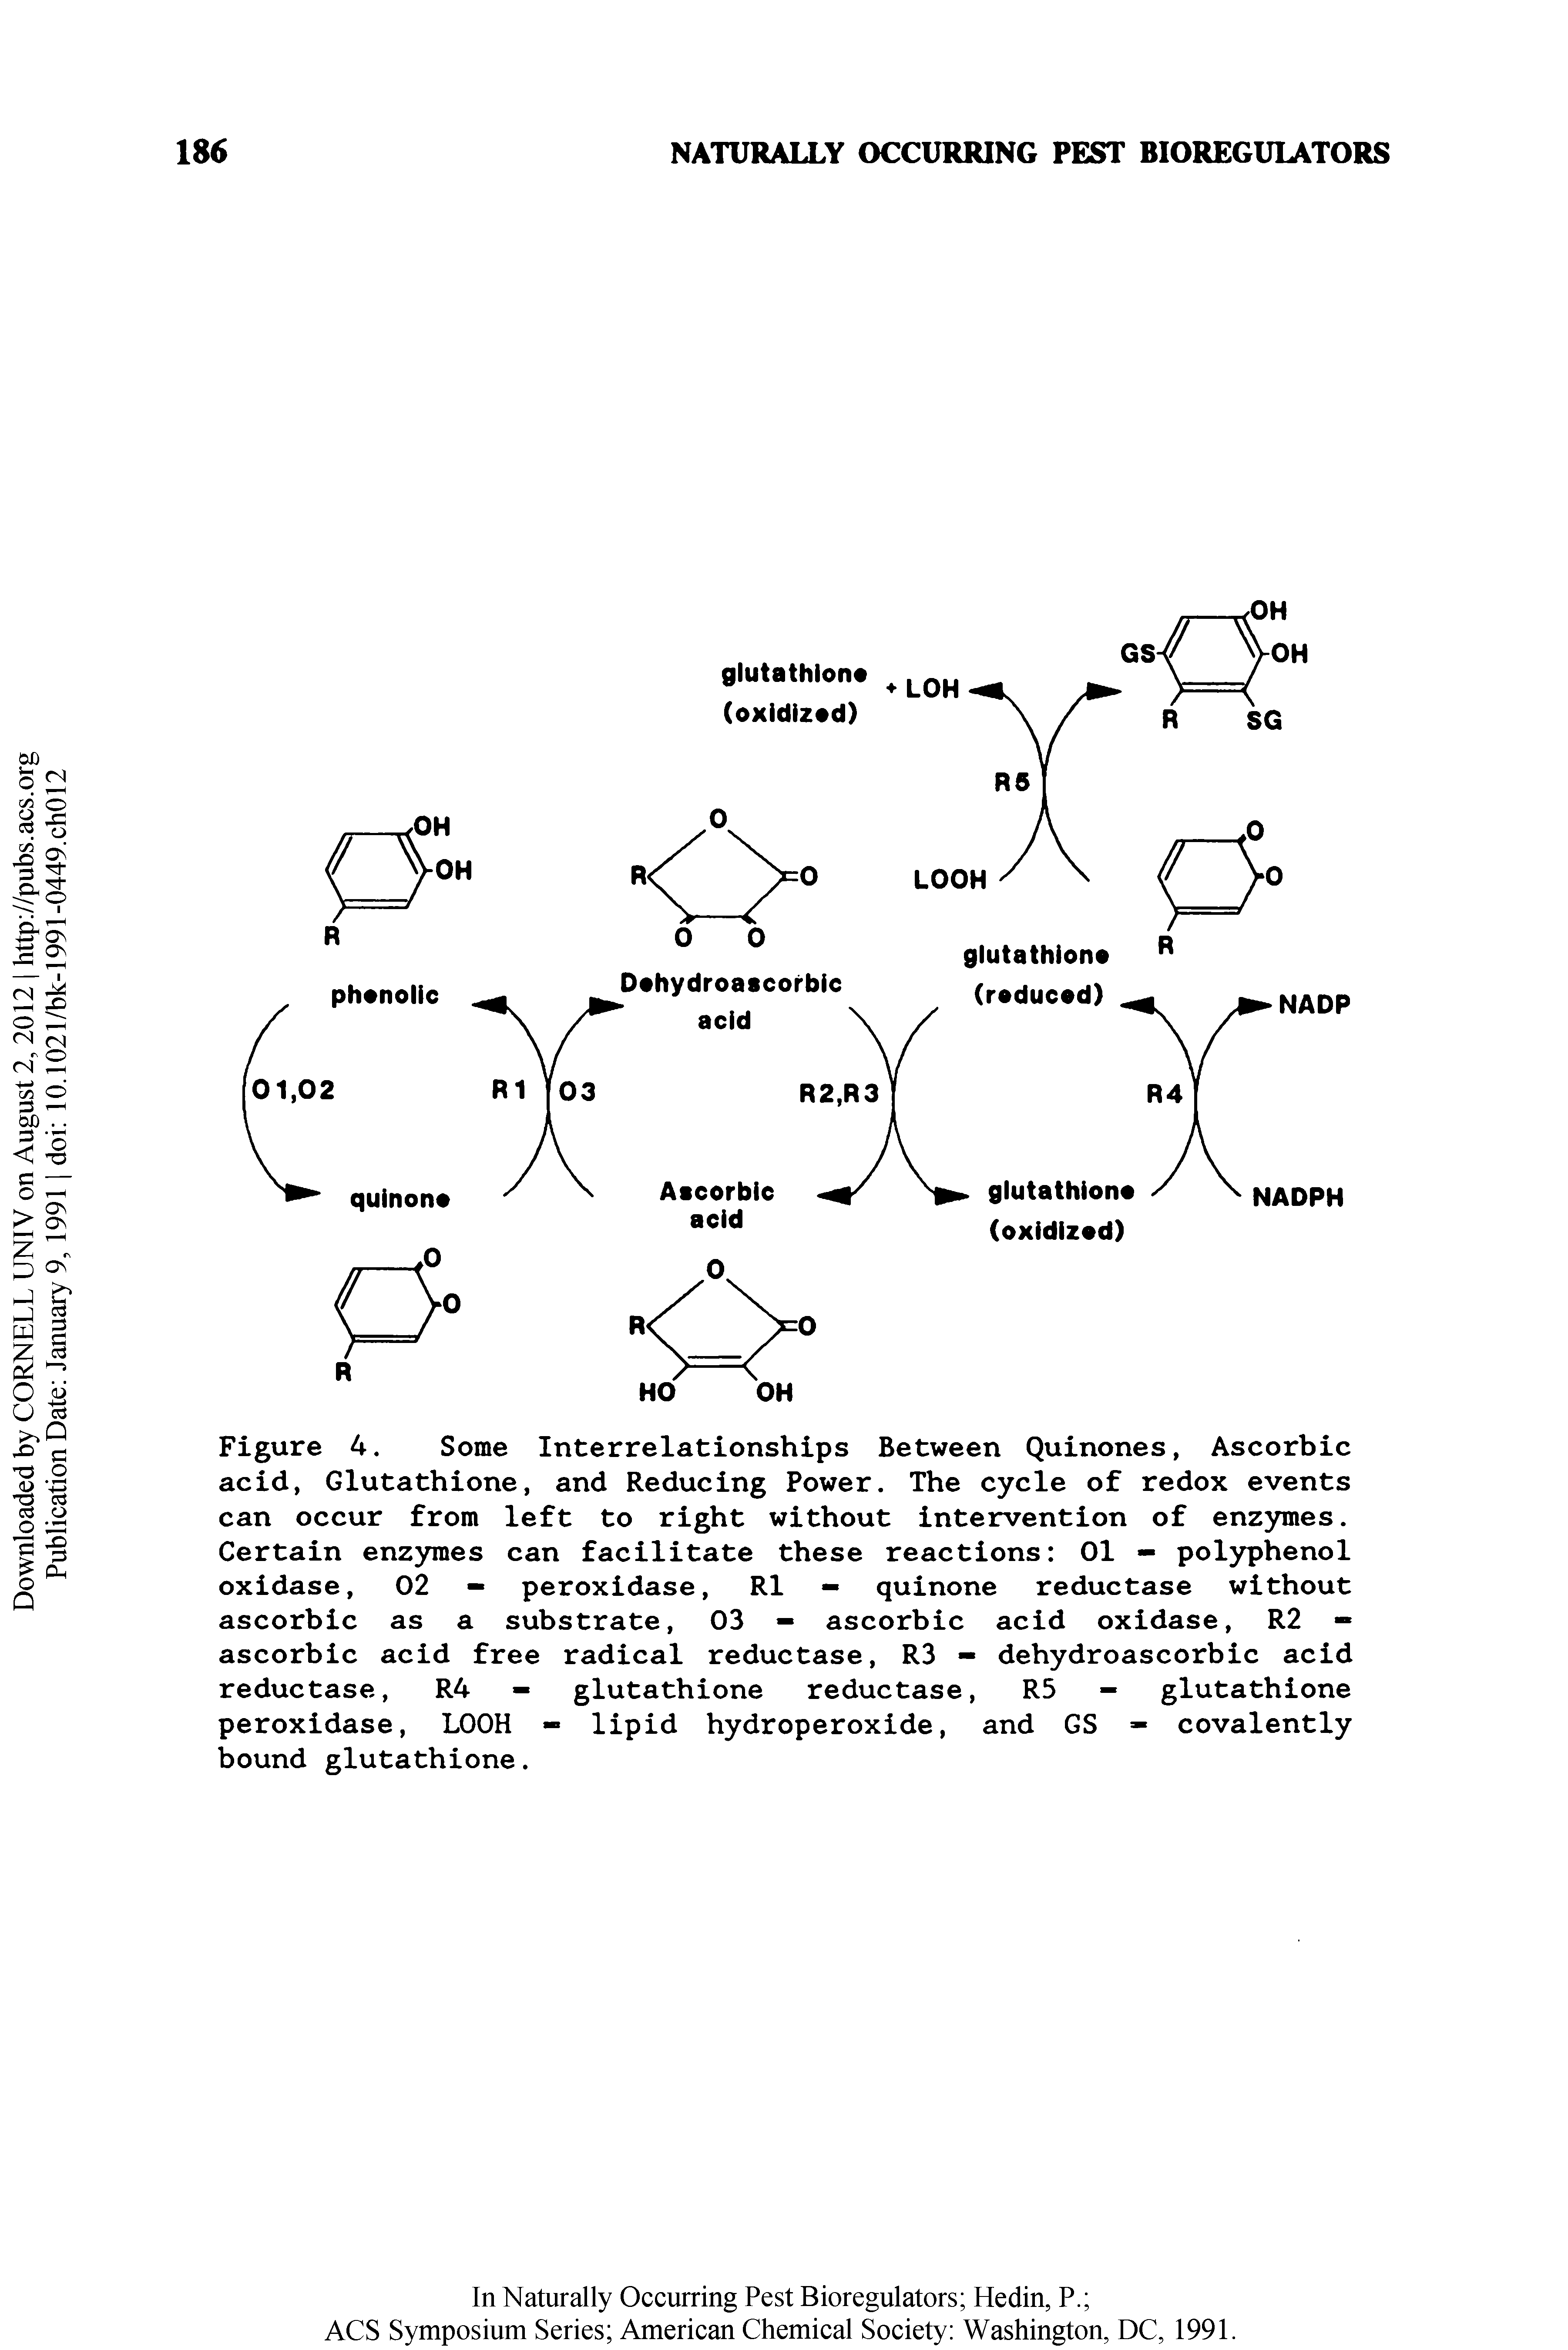 Figure 4. Some Interrelationships Between Quinones, Ascorbic acid, Glutathione, and Reducing Power. The cycle of redox events can occur from left to right without intervention of enzymes. Certain enz3rmes can facilitate these reactions 01 - polyphenol oxidase, 02 - peroxidase, R1 - quinone reductase without...